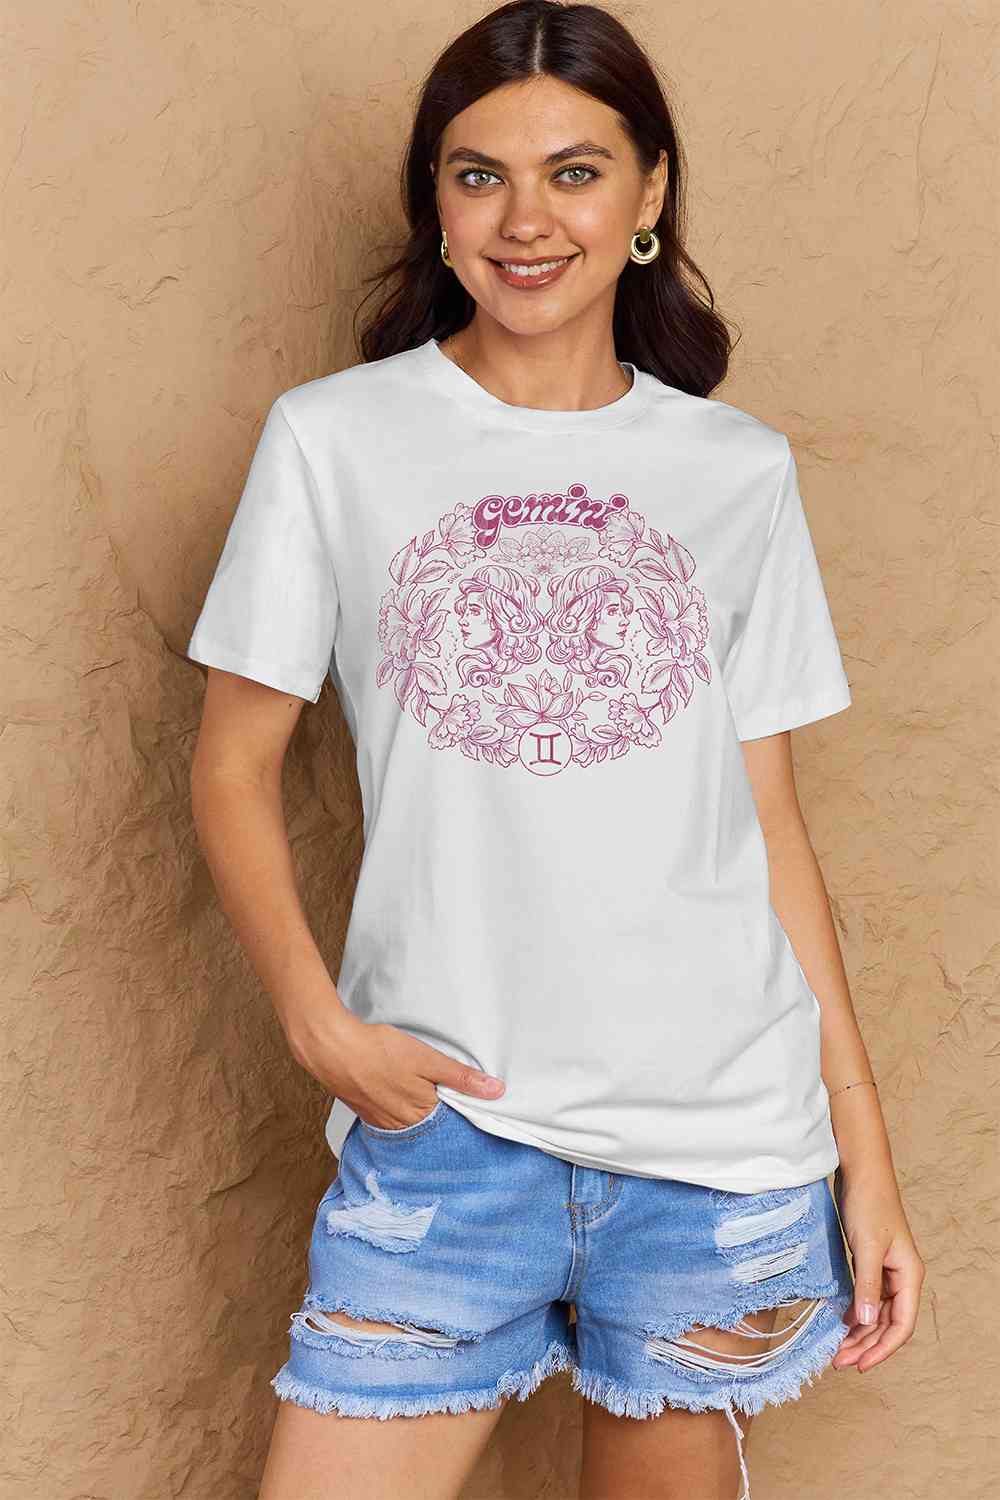 Simply Love Full Size GEMINI Graphic T-Shirt BLUE ZONE PLANET